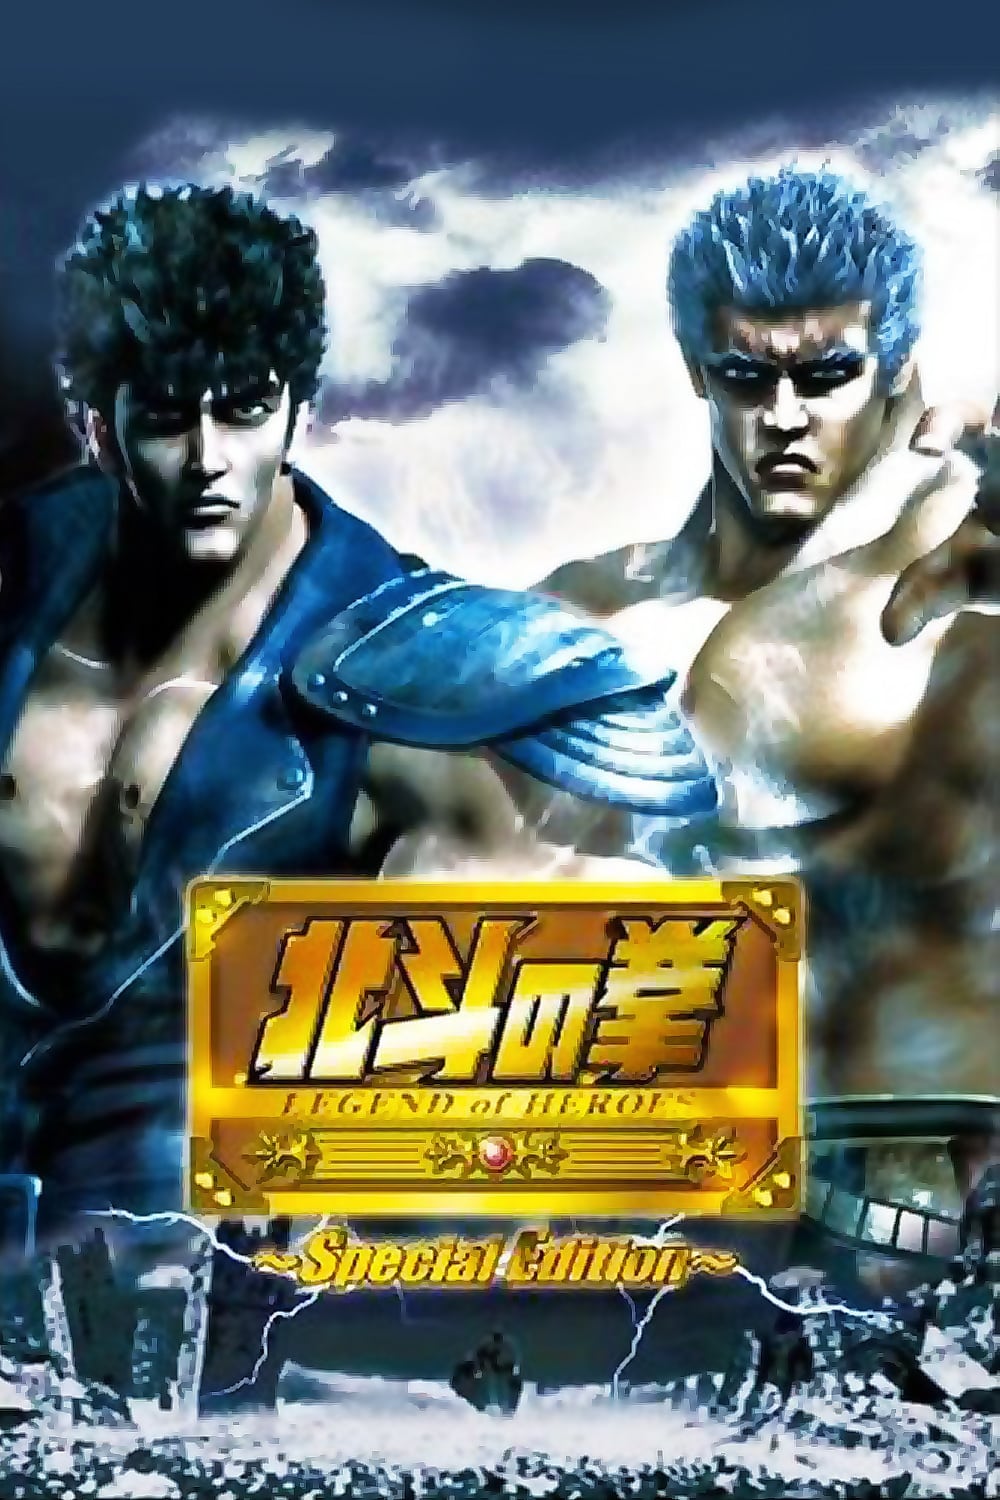 Fist of The North Star: Legend of Heroes